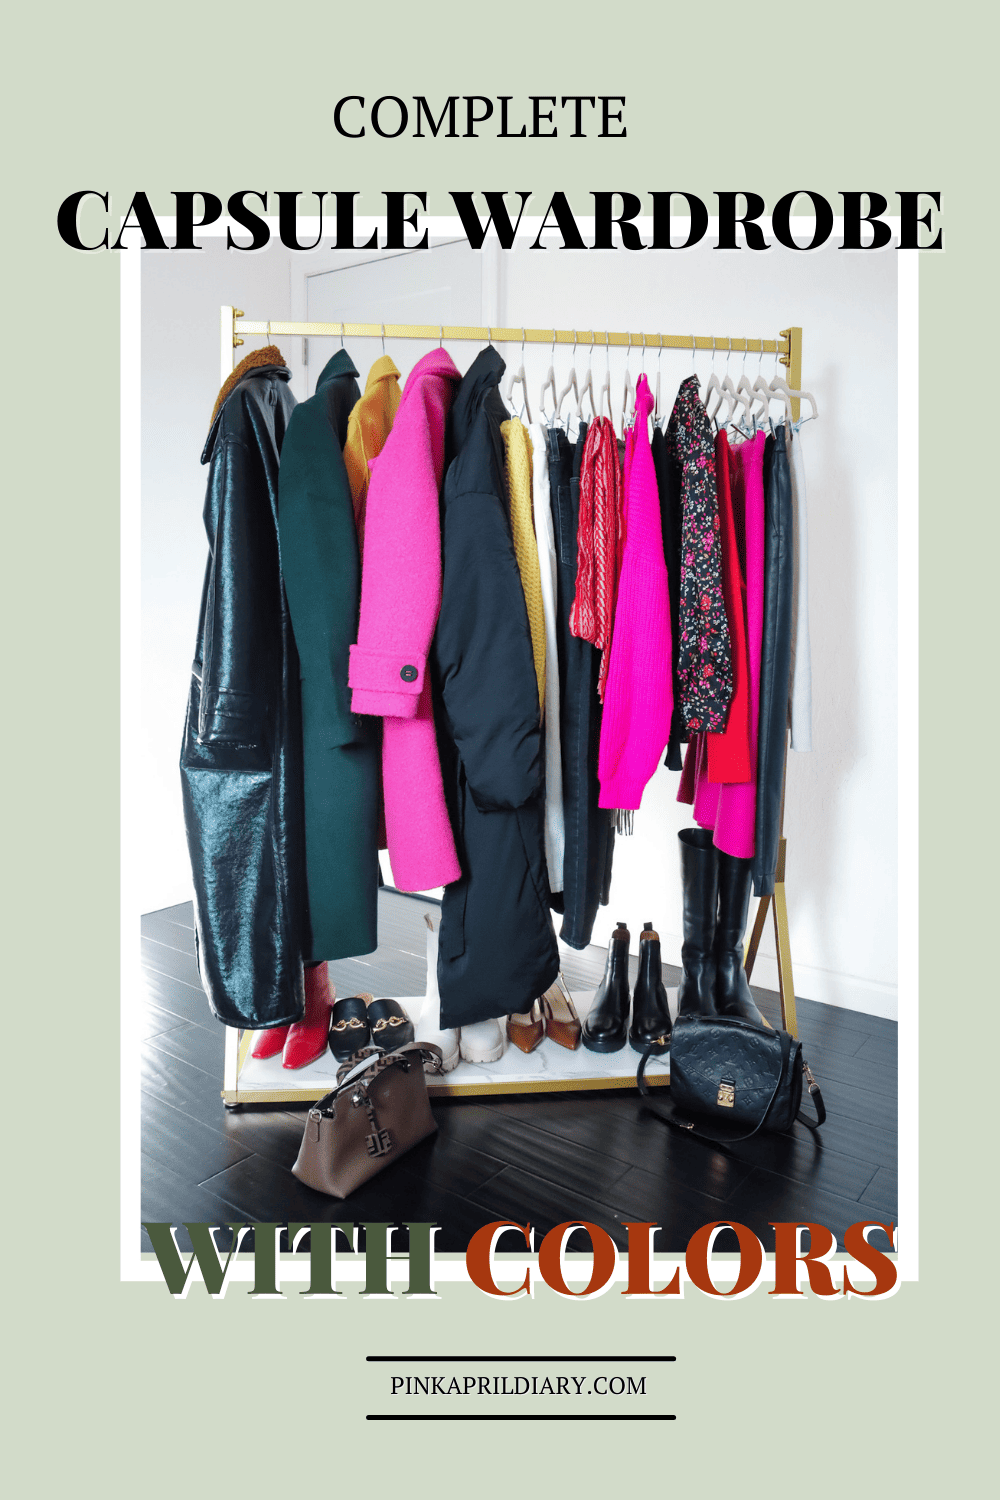 Your Complete Winter Capsule Wardrobe Plan with Colors